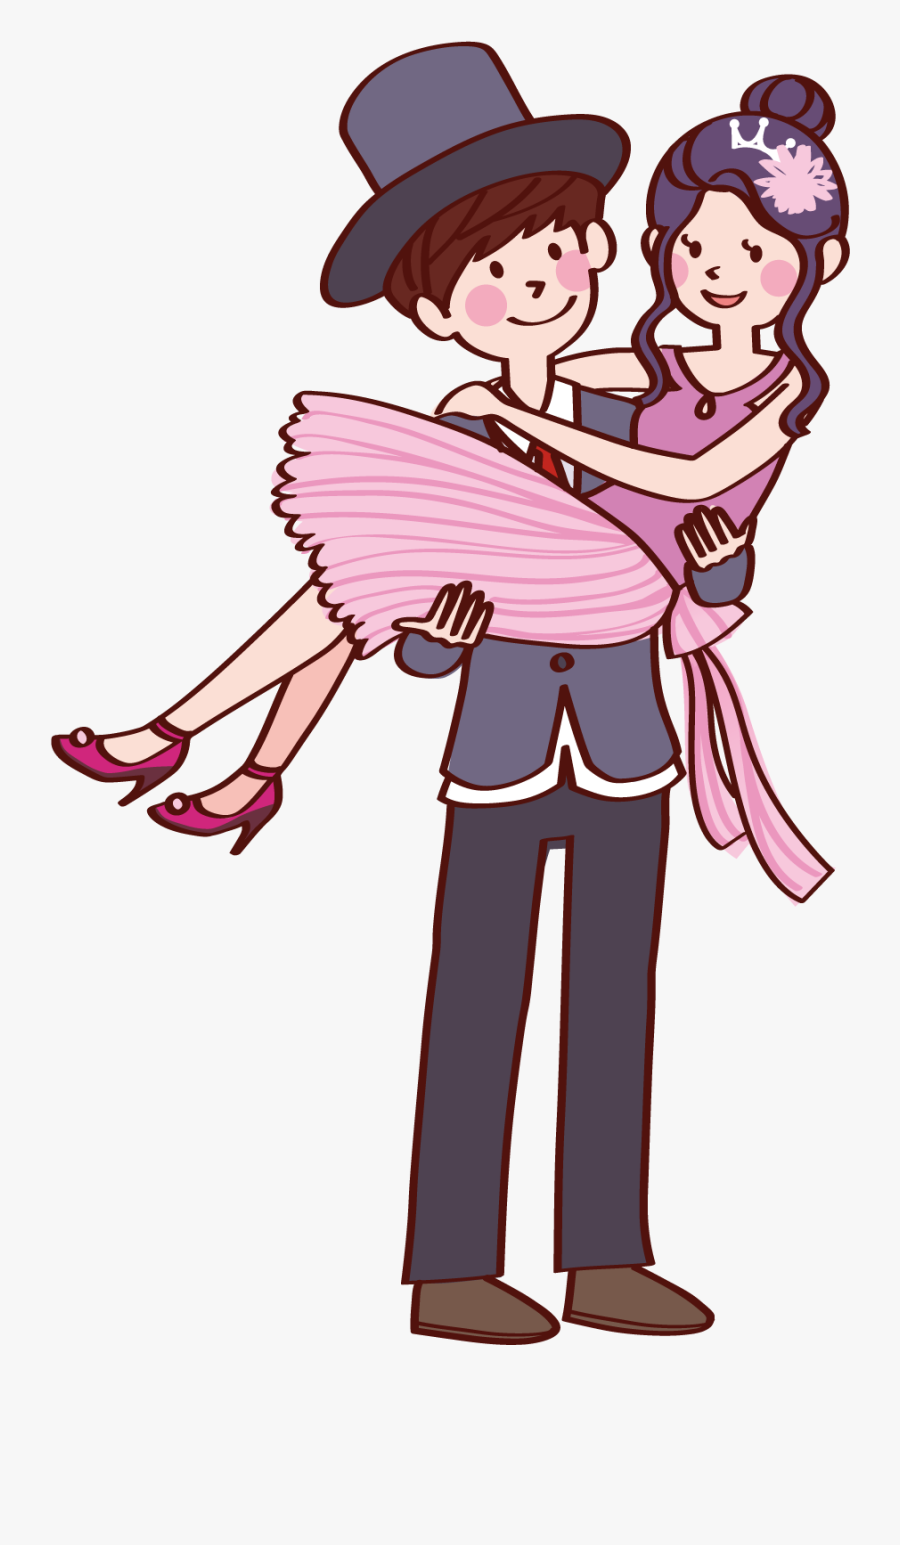 Couples Clip Fall In Love - Cartoon Couple Love Images Hd, Transparent Clipart